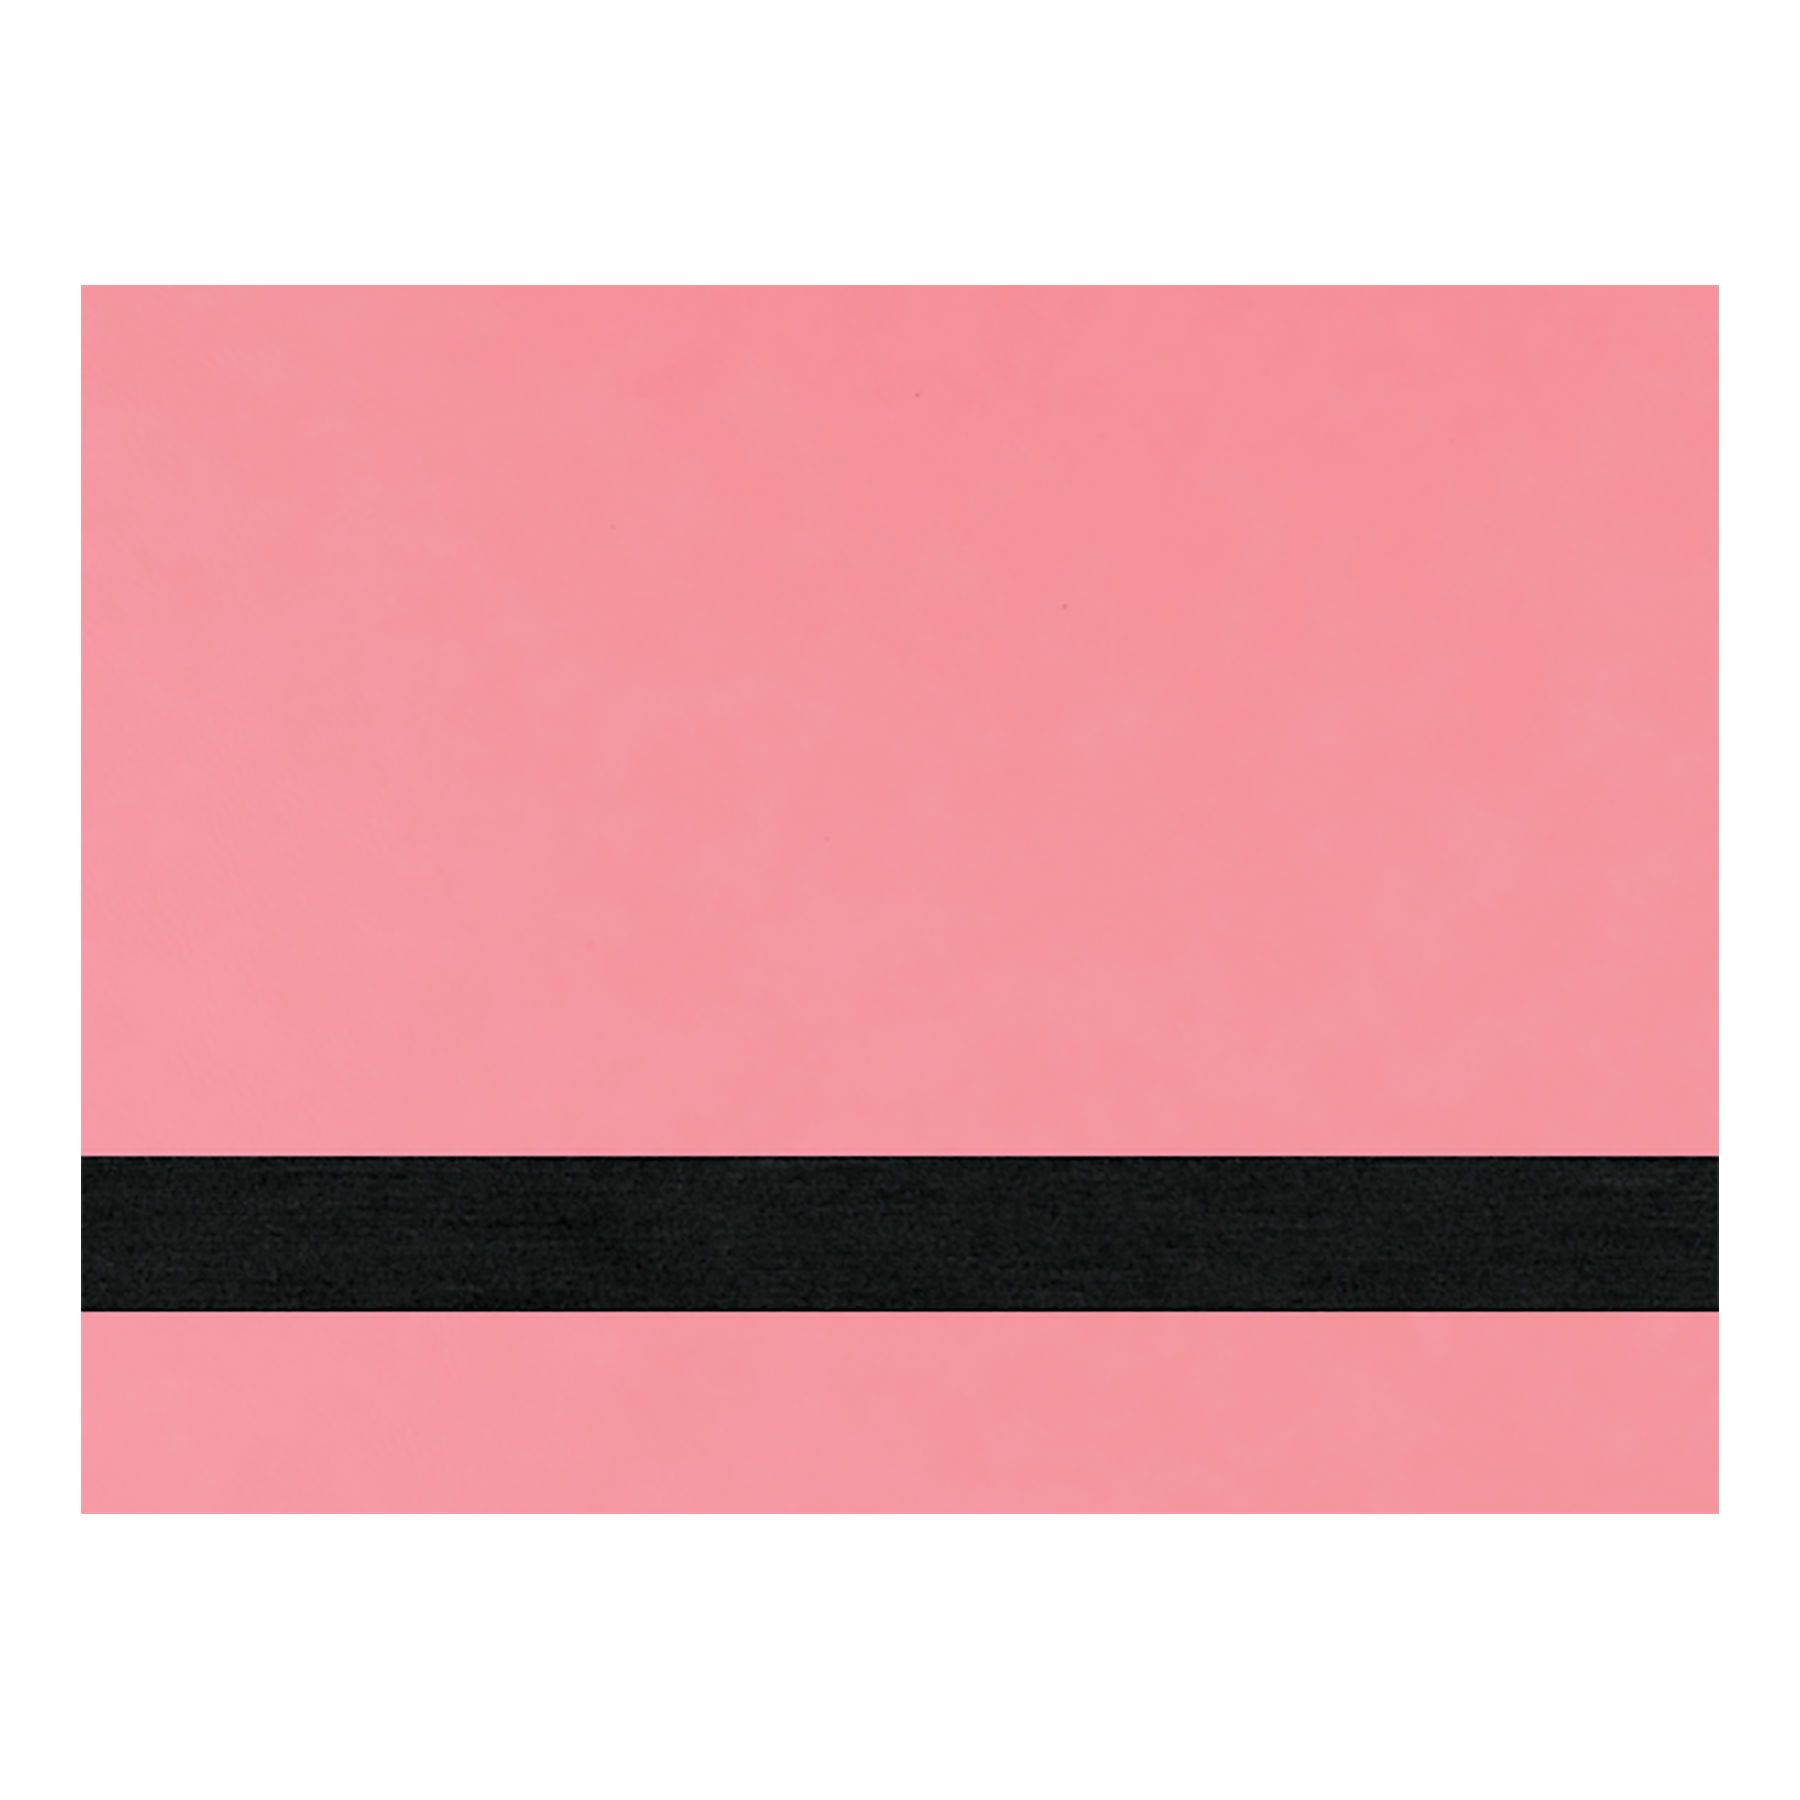 PRE-ORDER! Full Size Laserable Leatherette Sheet Stock, Epilog Fusion Pro Laser Engravers (Available Jan. 2022) Engraving Supplies Craftworks NW Fusion Pro 24 (24" x 24") Pink/Black 